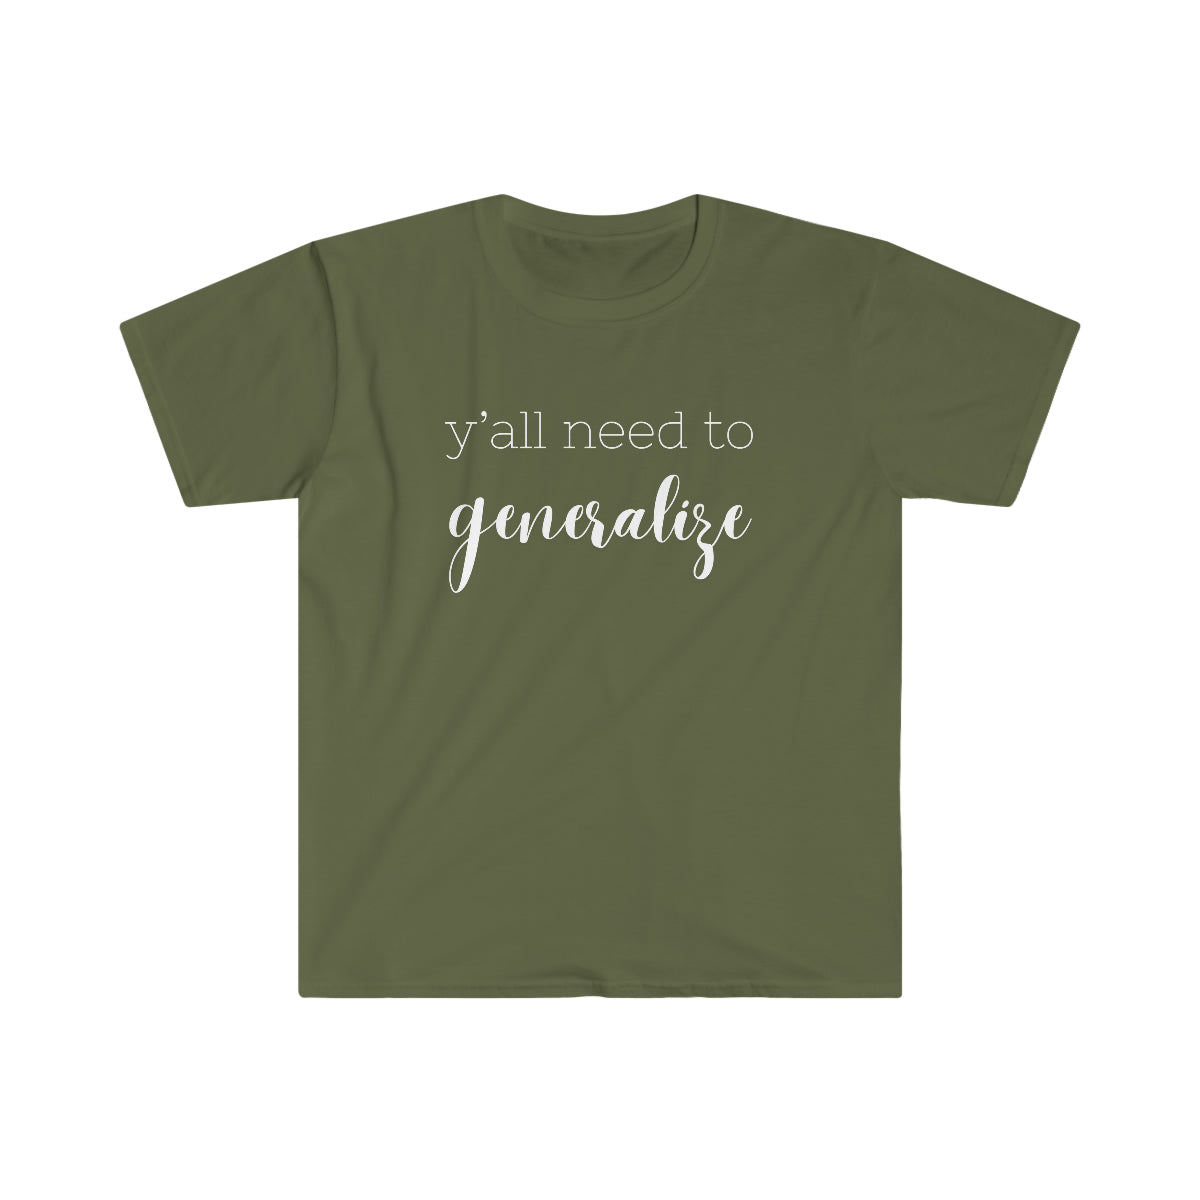 Y'all Need to Generalize Shirt | Applied Behavior Analysis | Autism awareness | ABA Shirt | behavior analyst